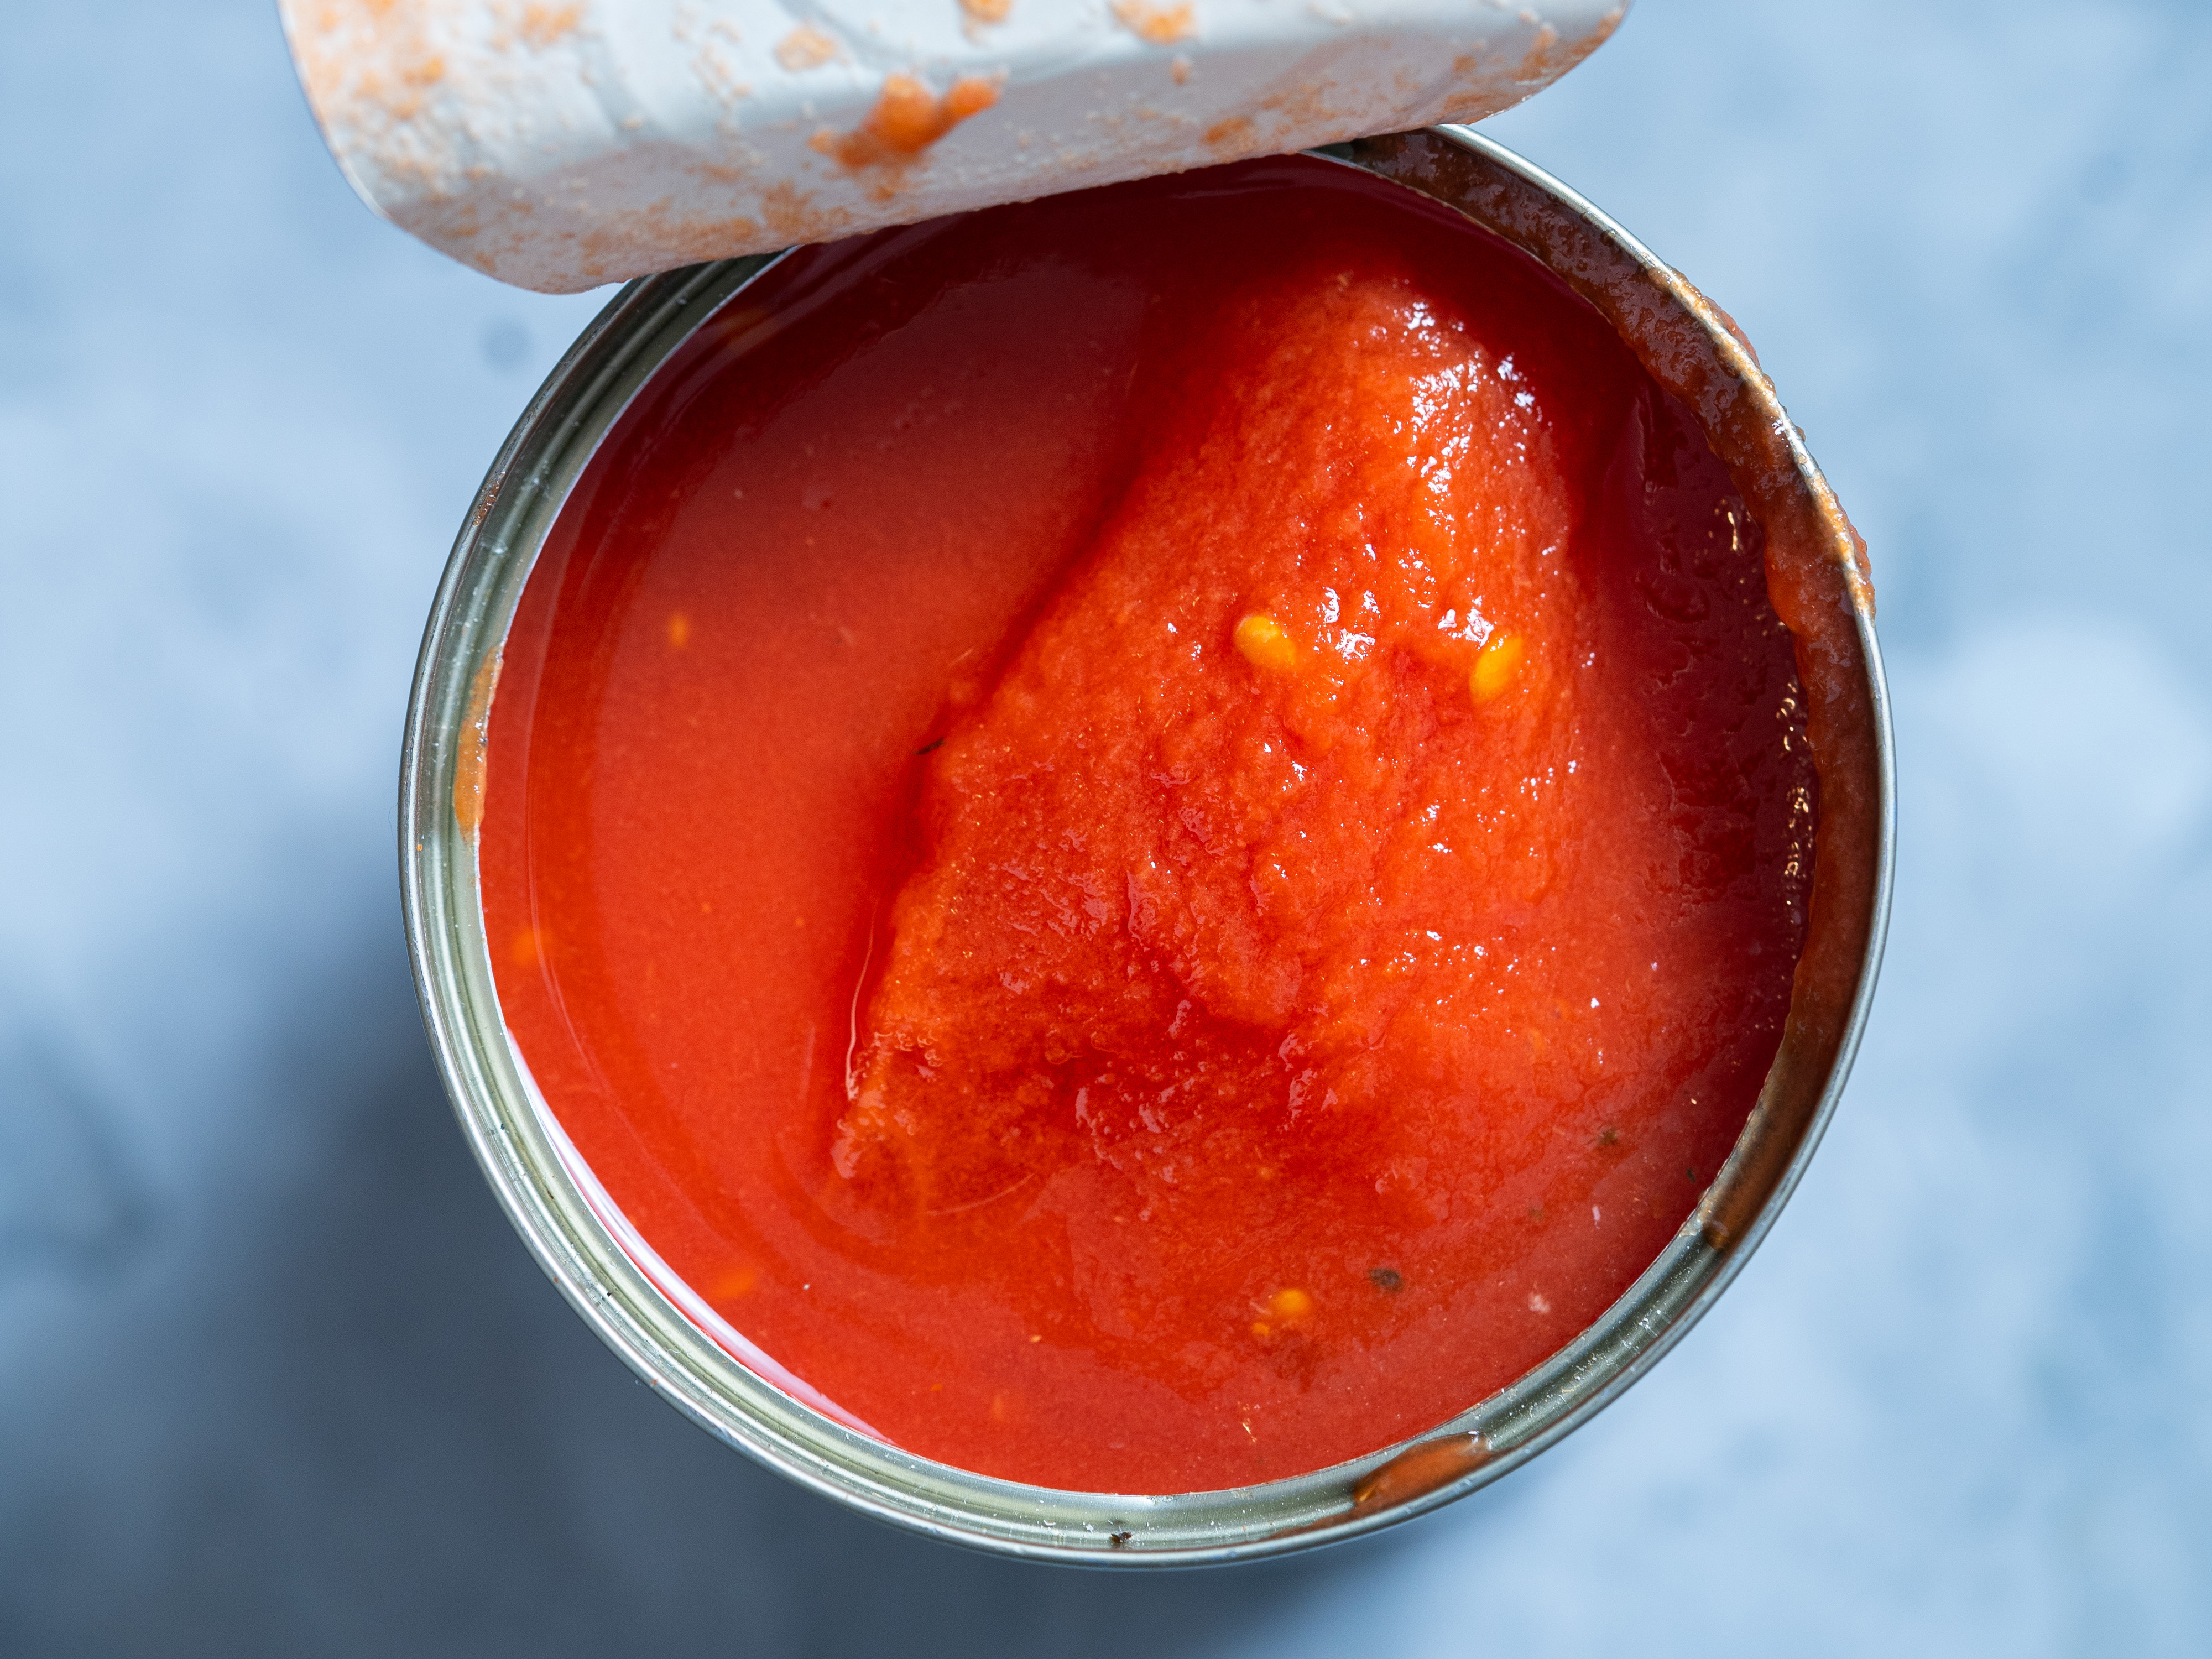 tomato paste substitute crushed tomatoes